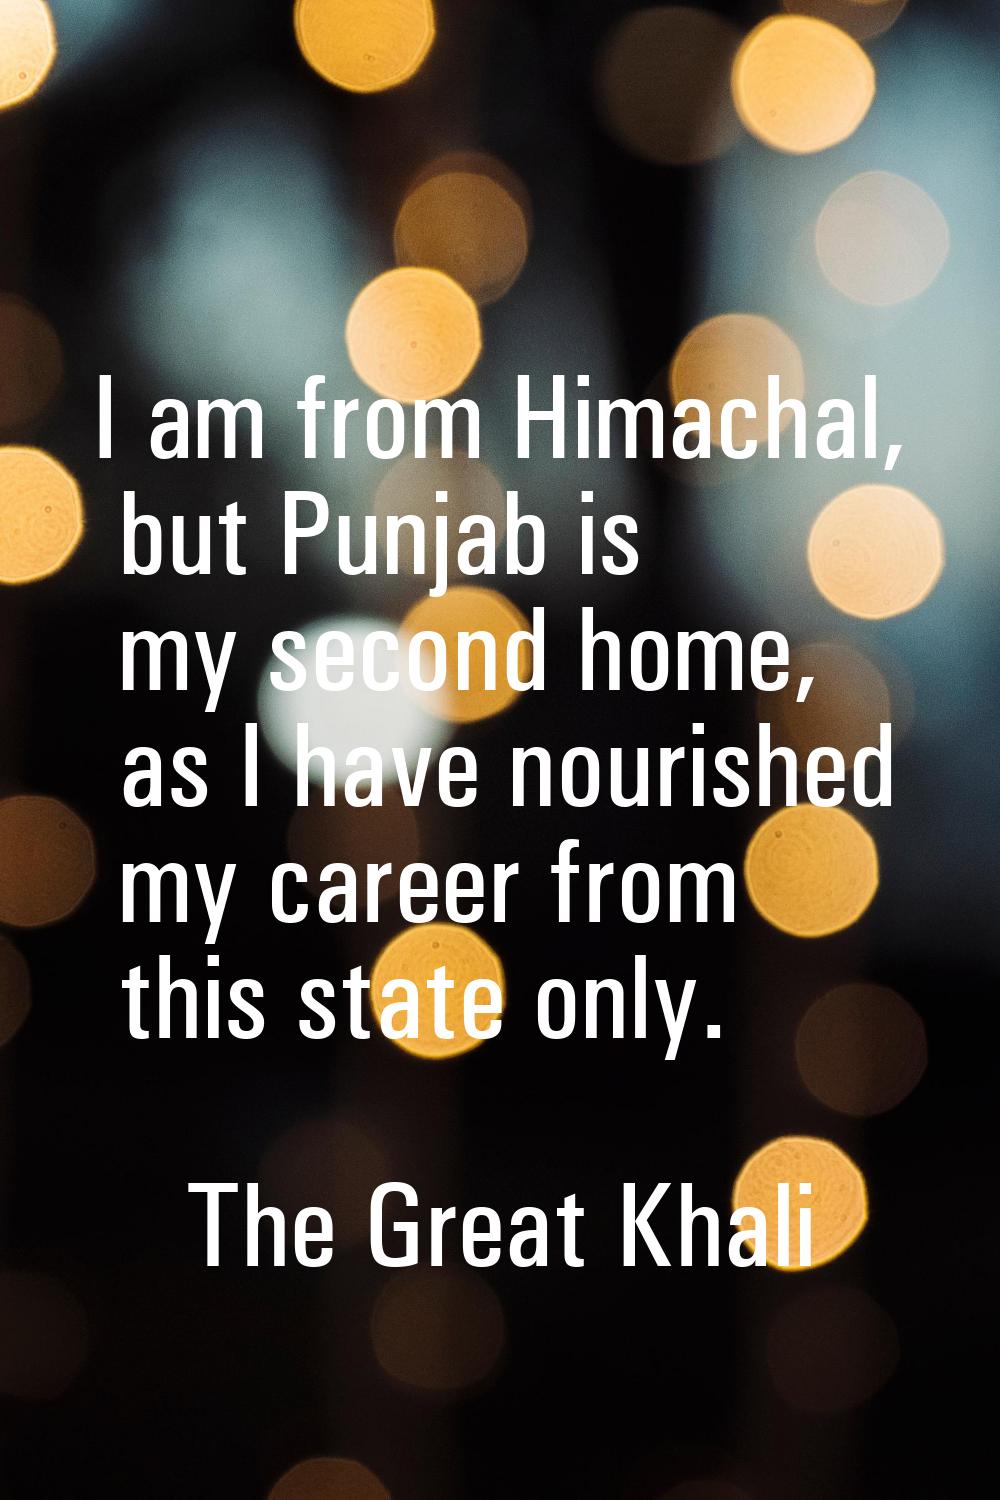 I am from Himachal, but Punjab is my second home, as I have nourished my career from this state onl